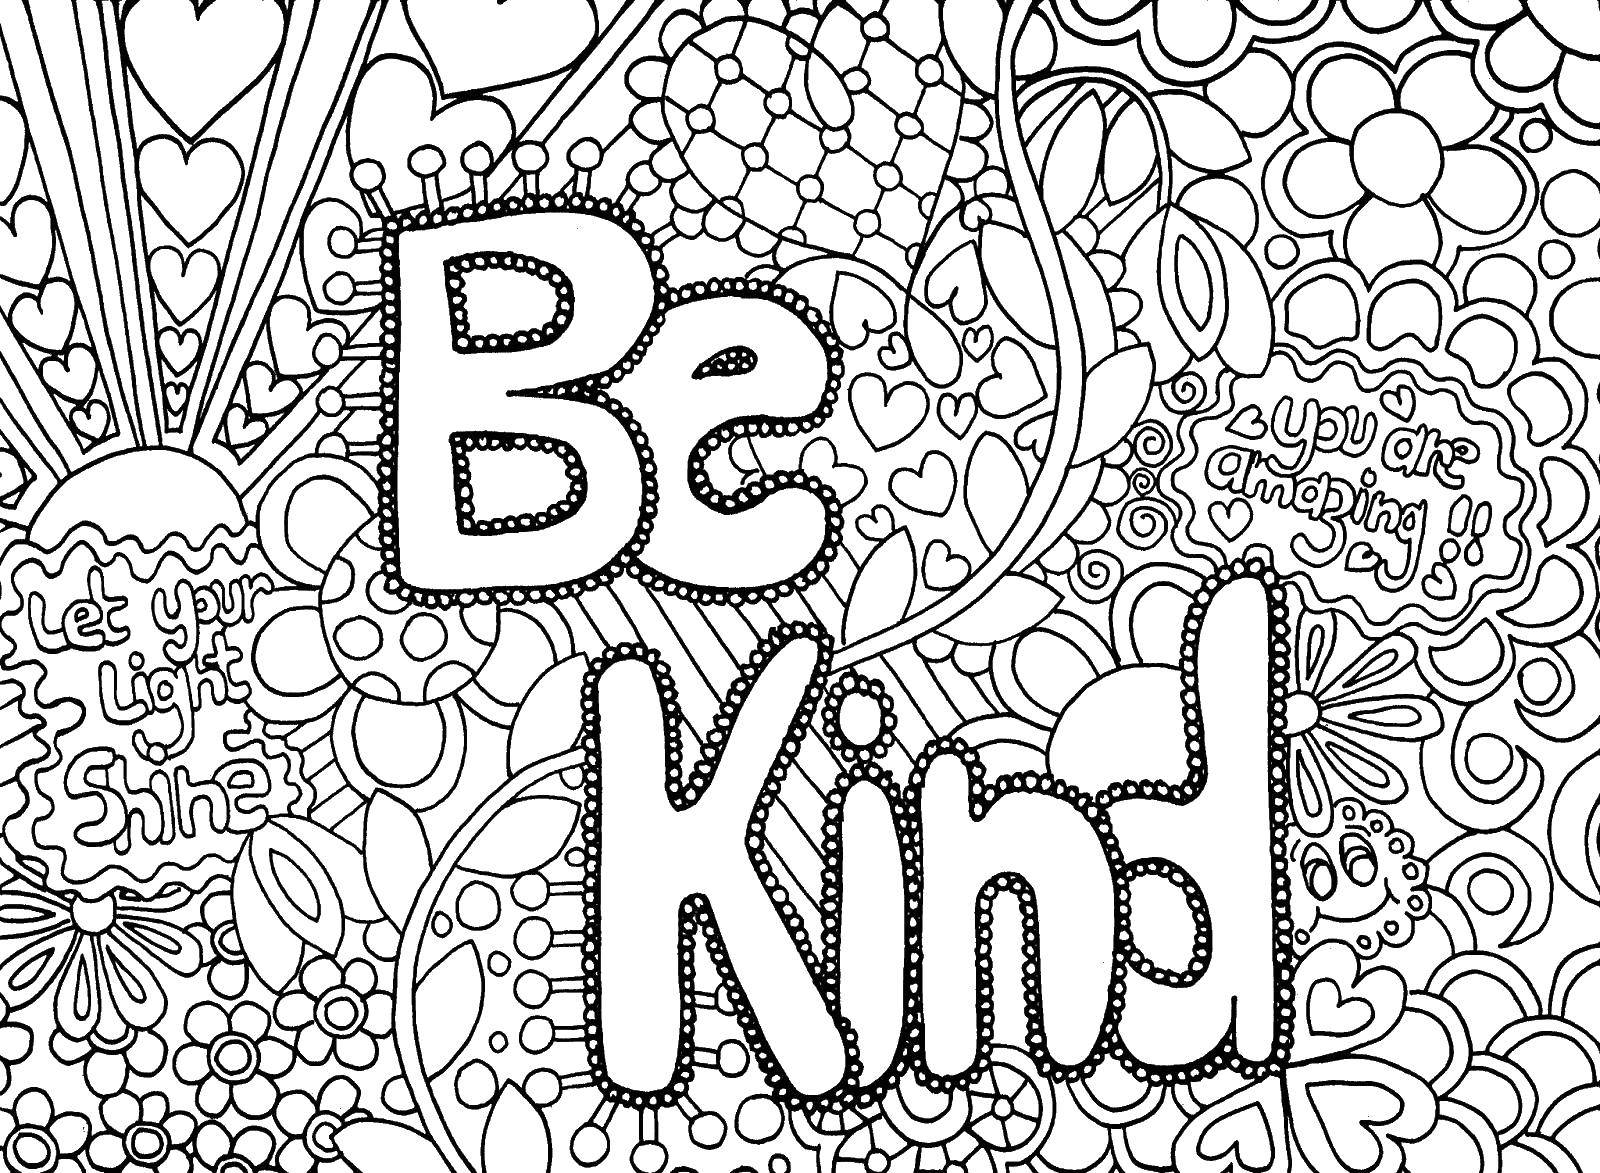 Coloring Be kind. Category patterns. Tags:  patterns, flowers, leaves.